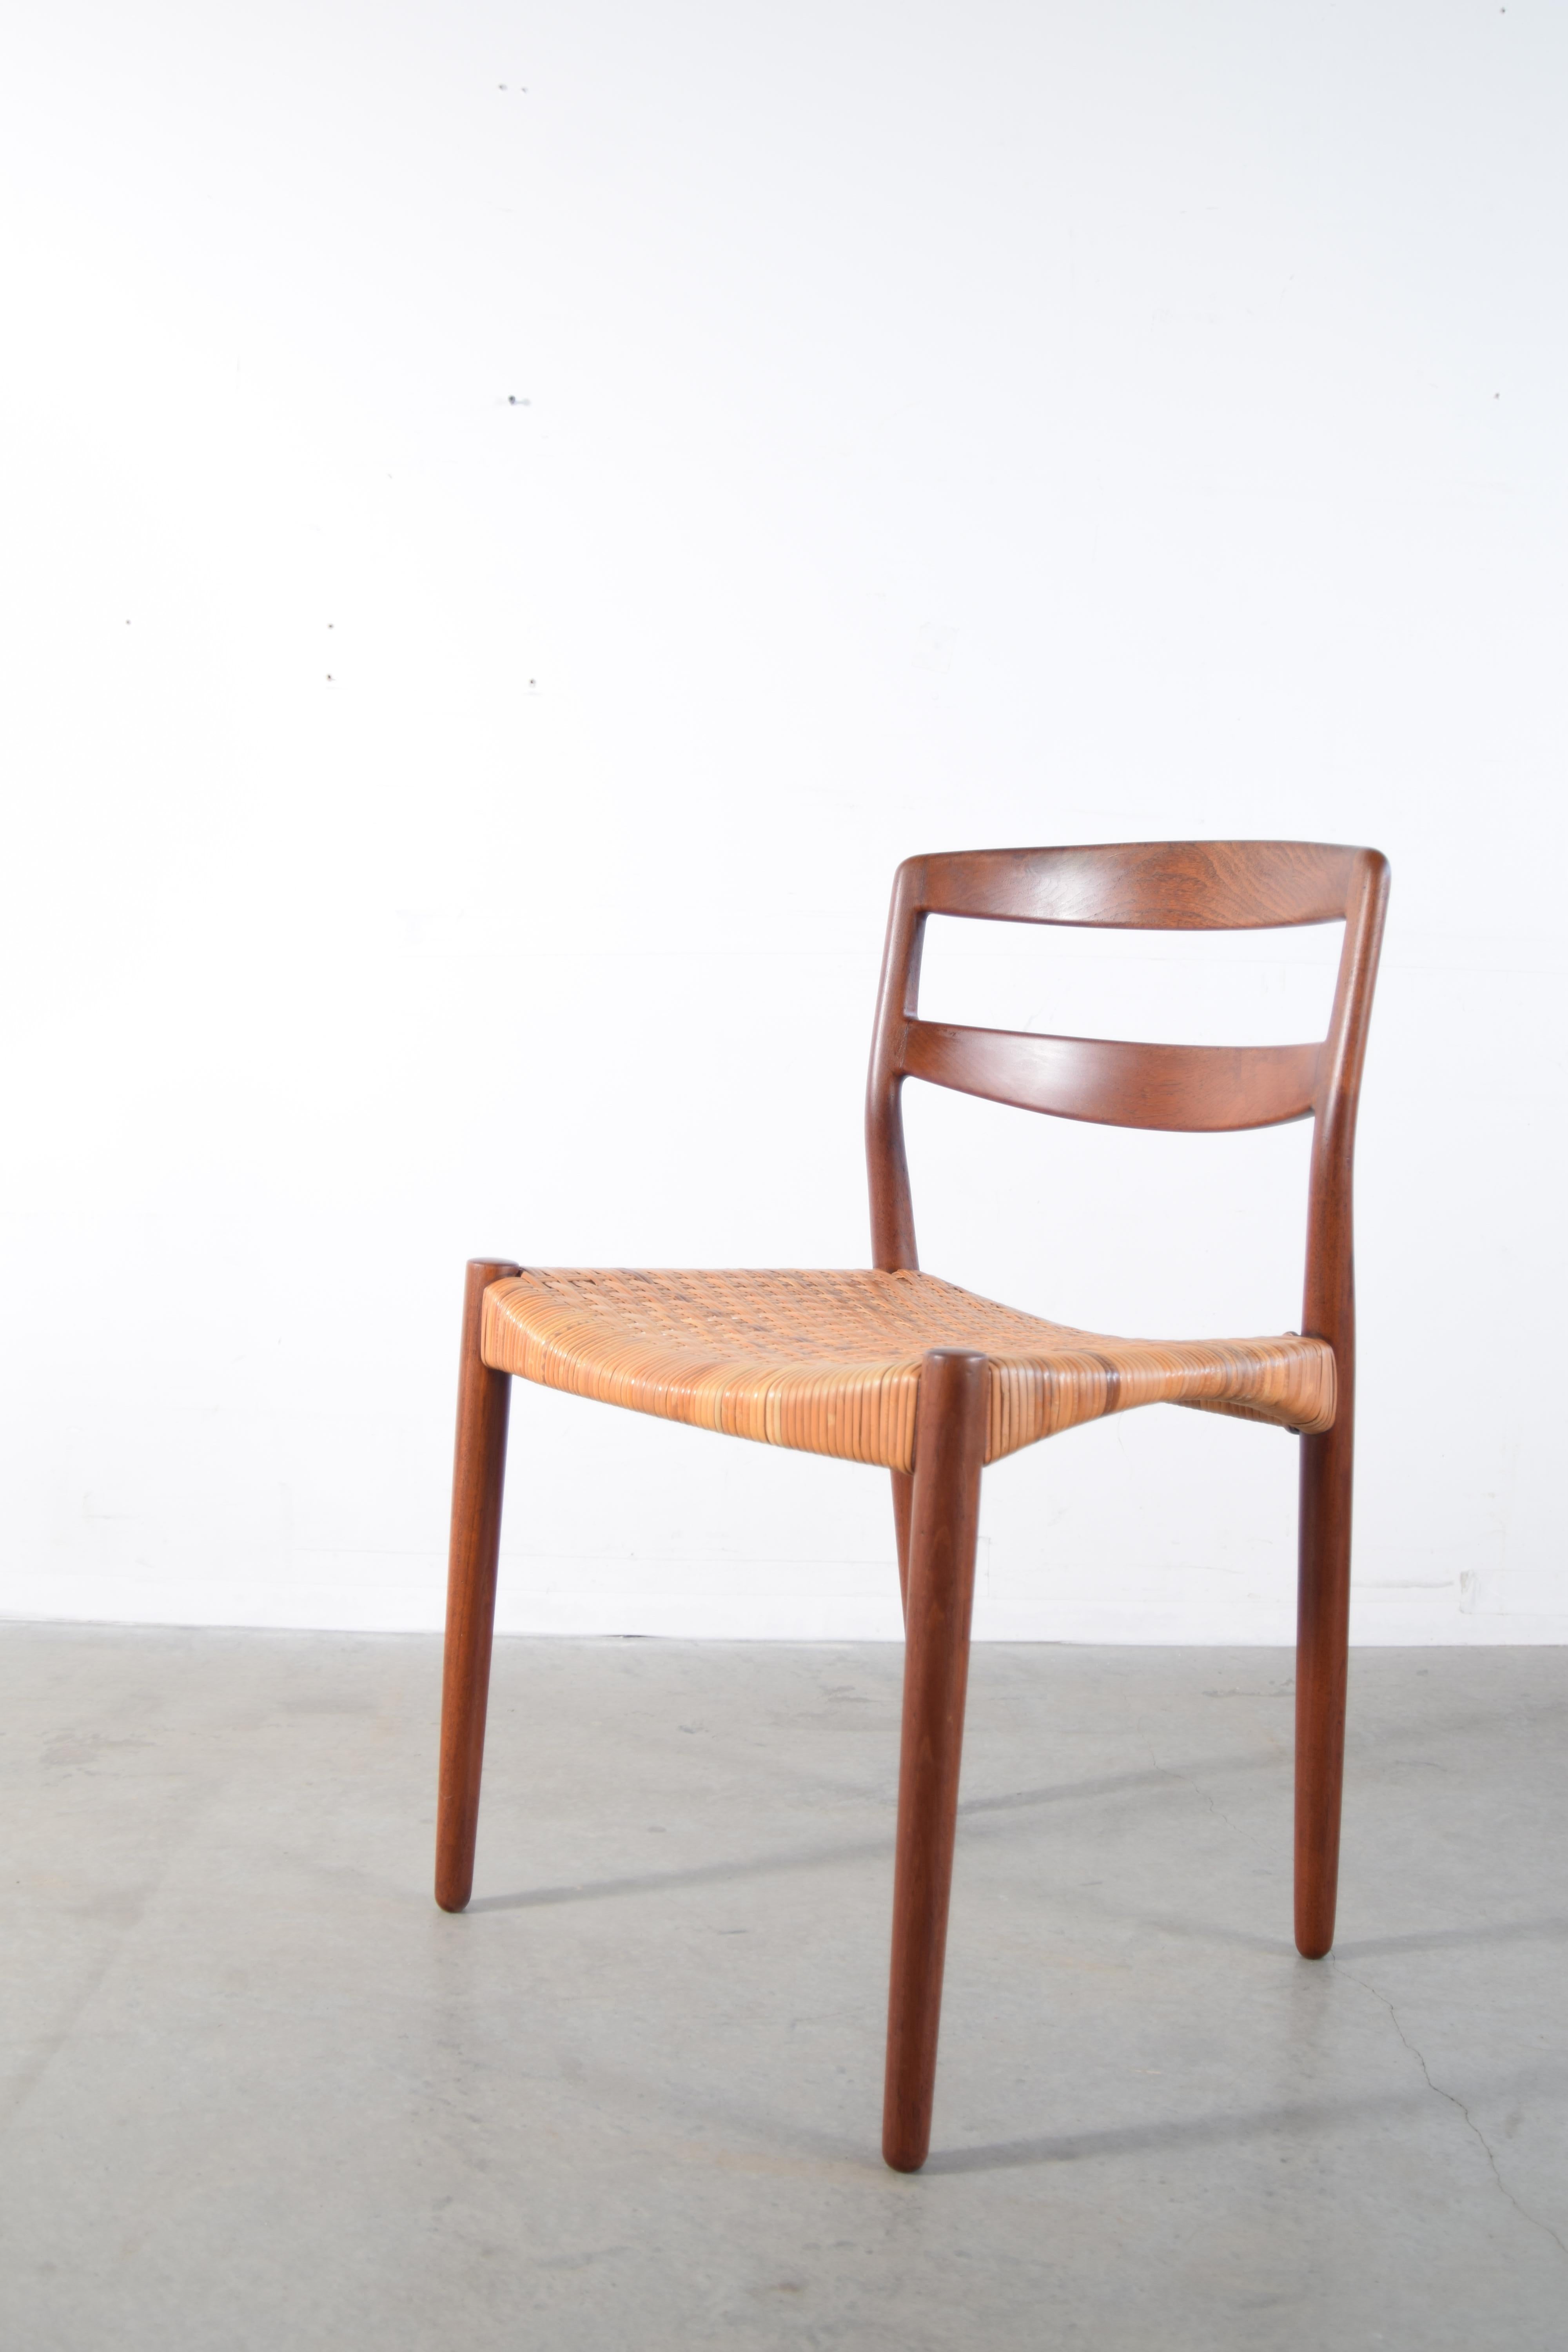 Pair of Ejner Larsen and Aksel Bender Madsen Teak and Cane Chairs For Sale 5